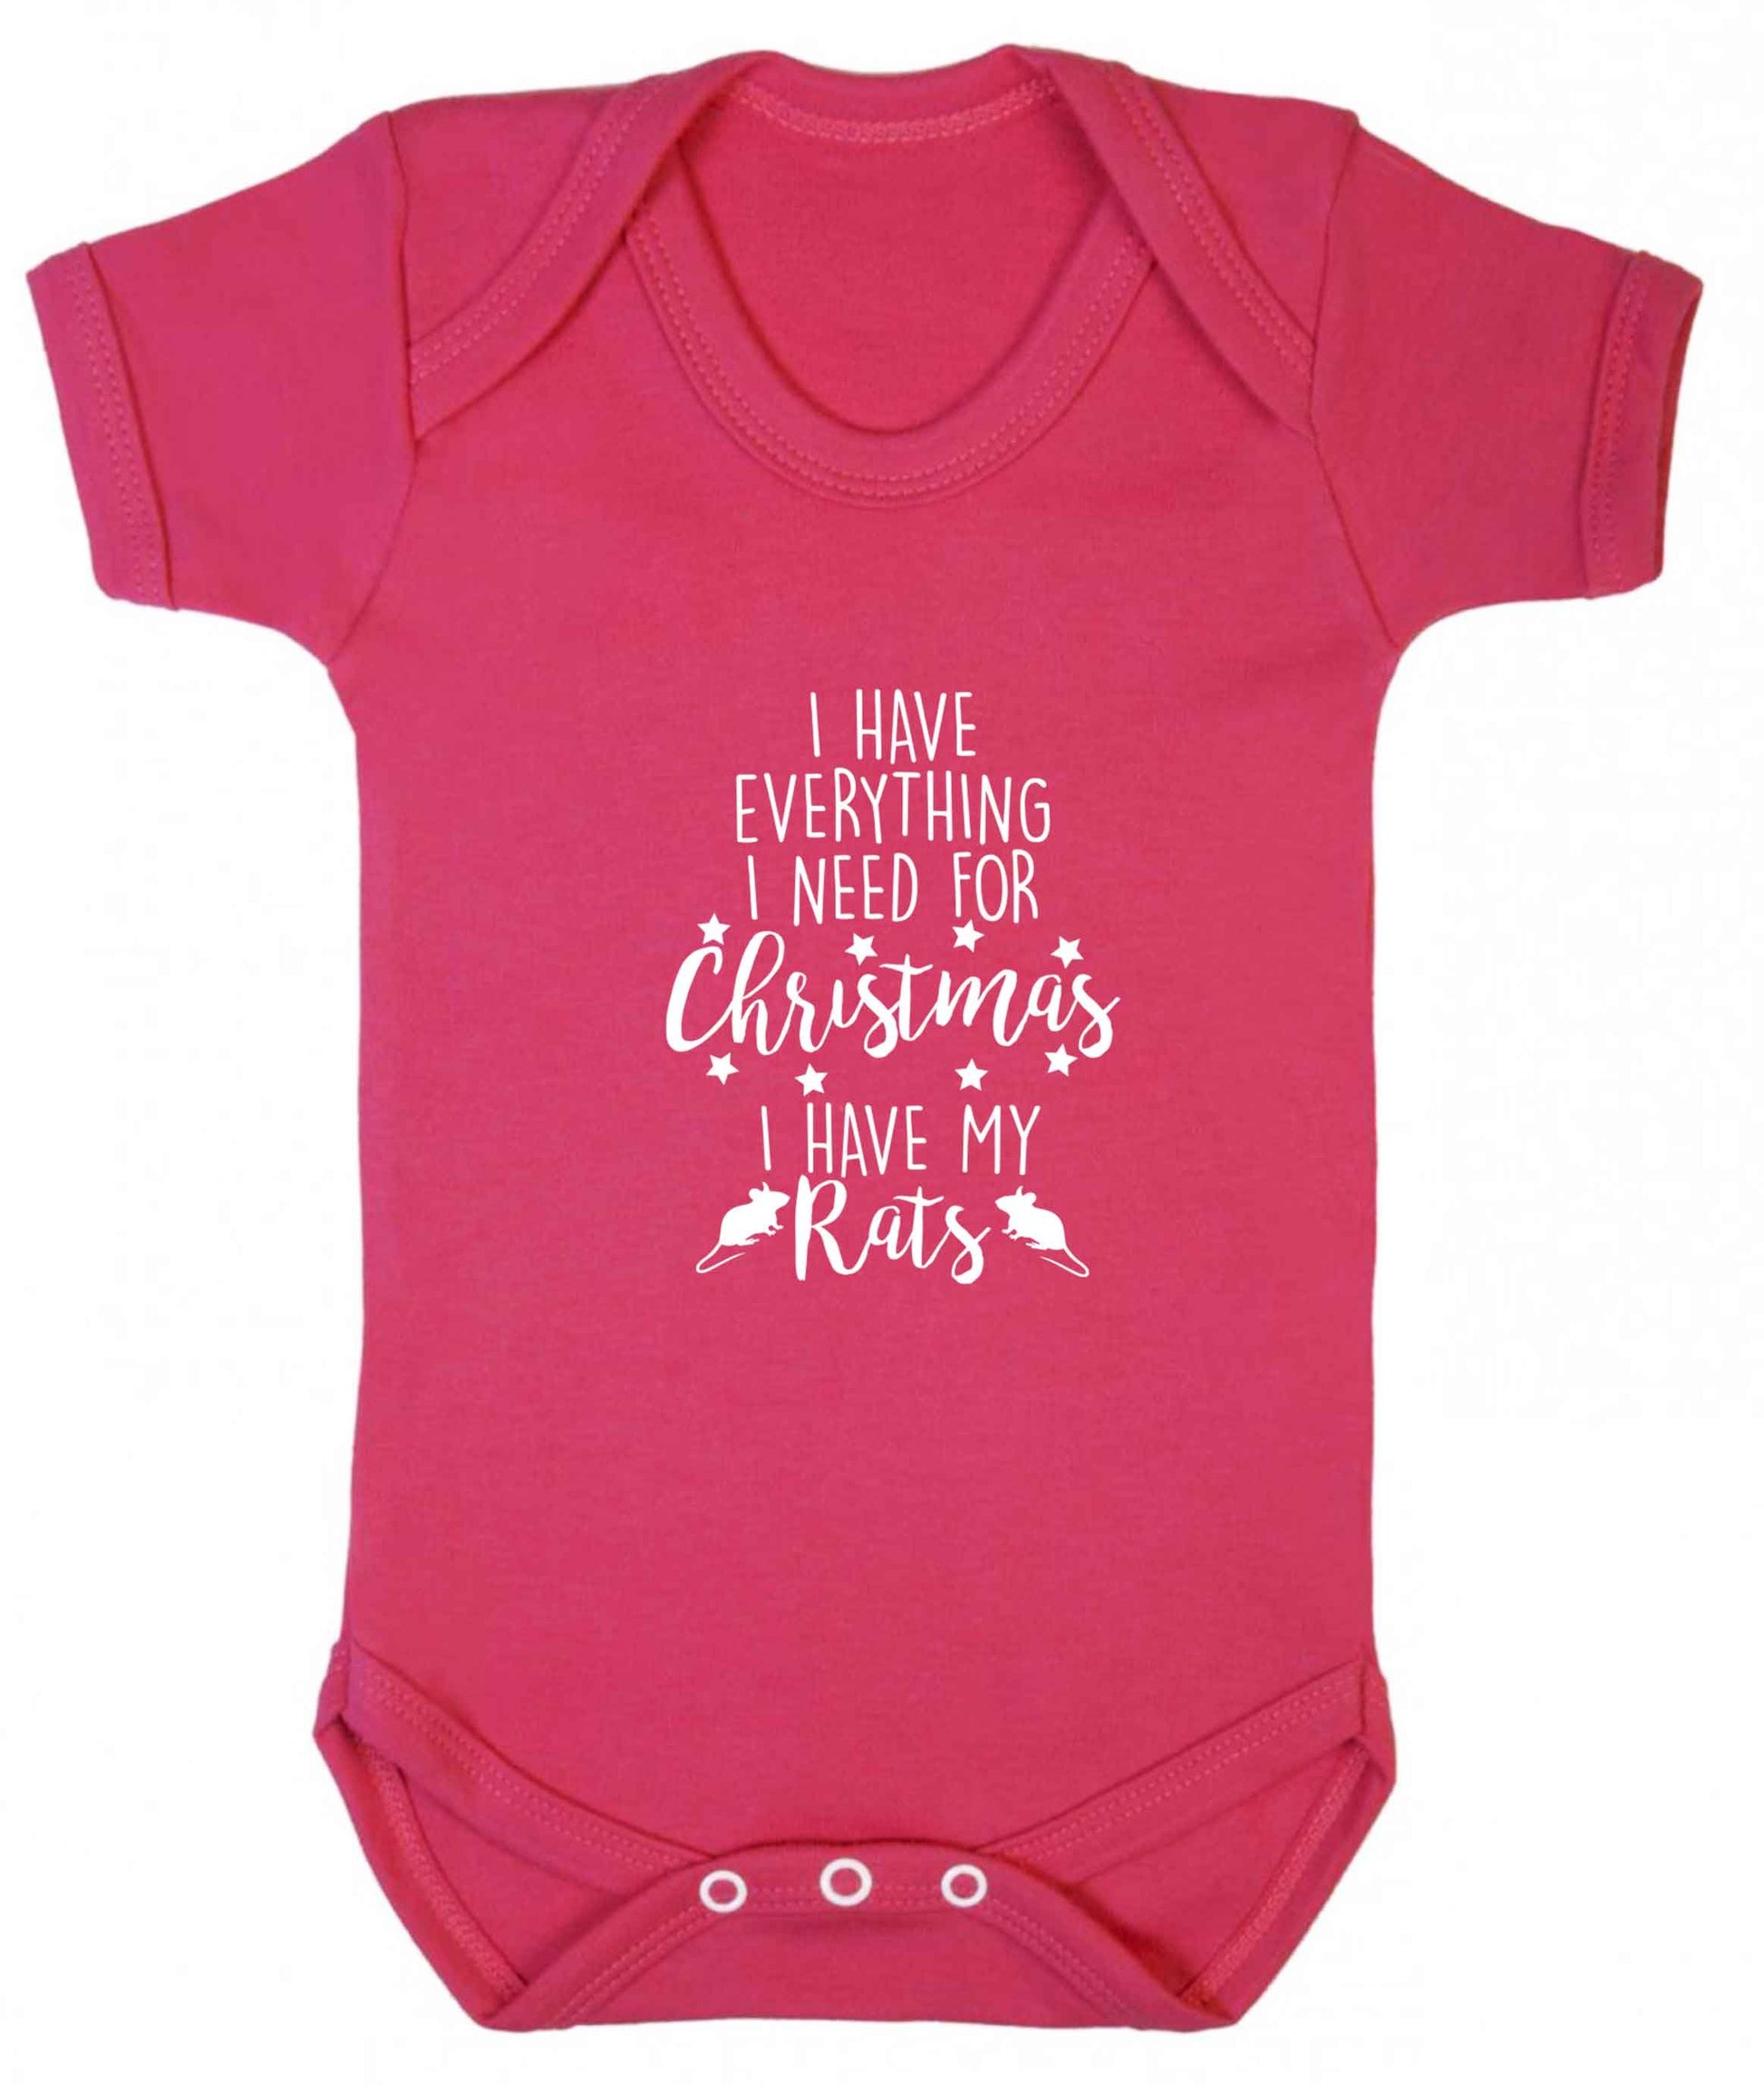 I have everything I need for Christmas I have my rats baby vest dark pink 18-24 months